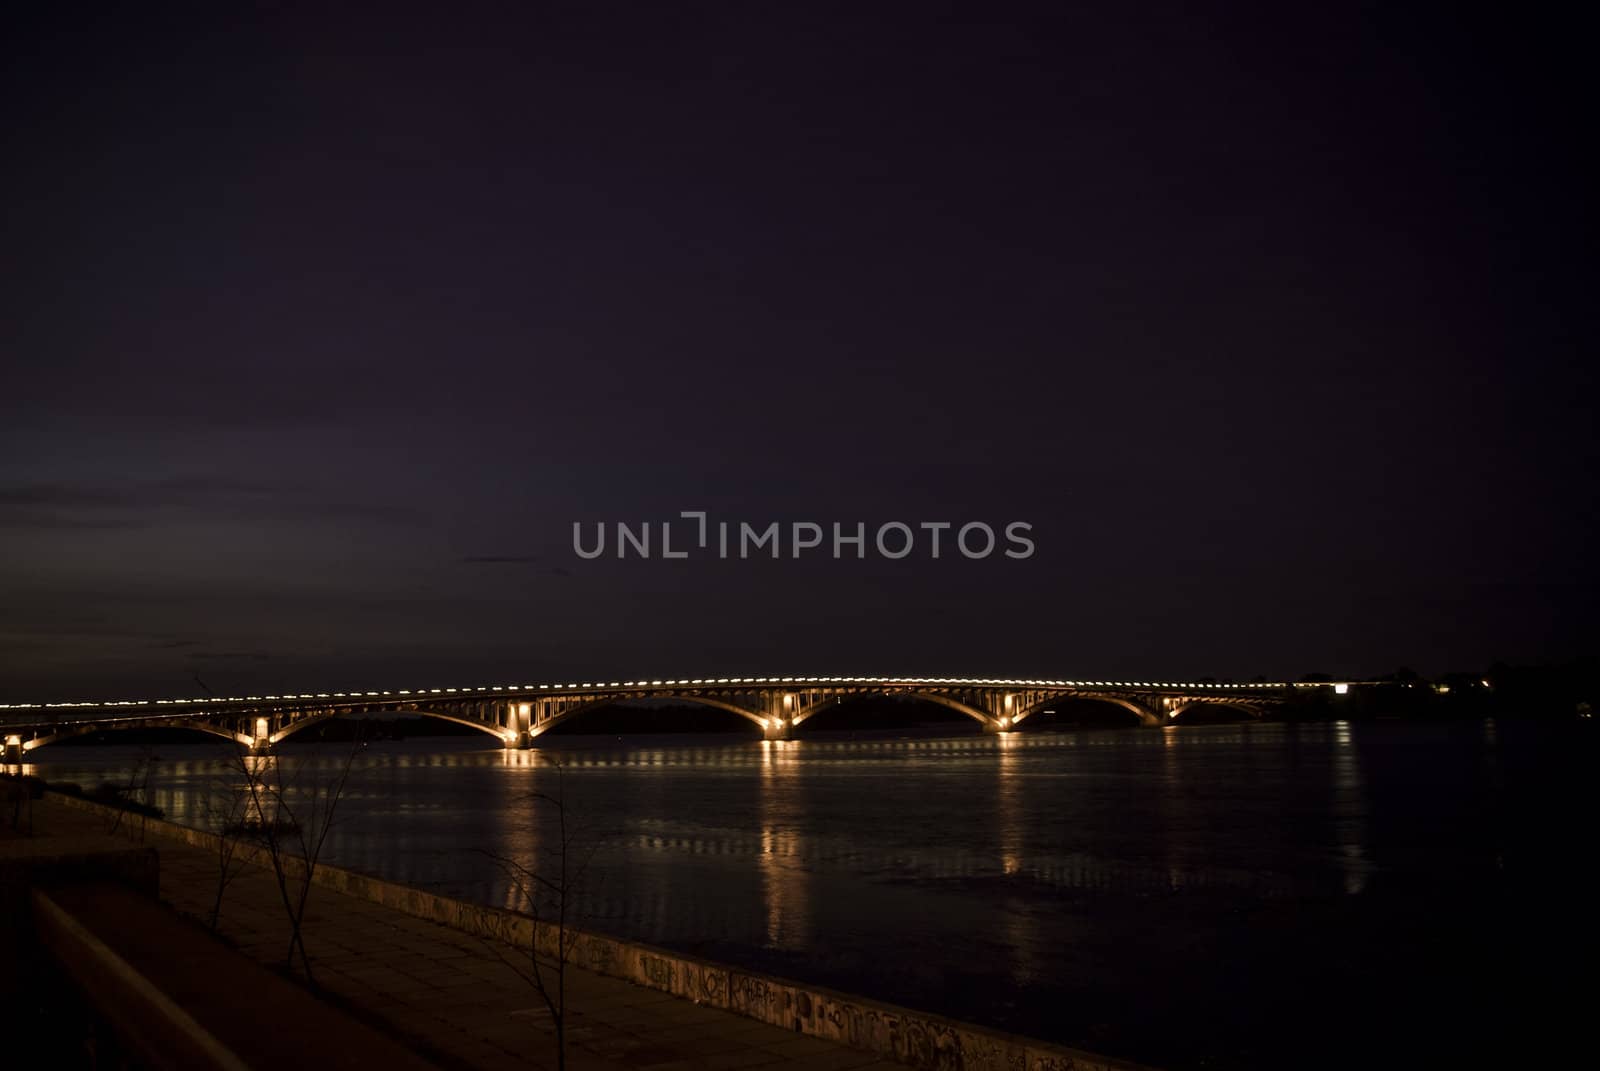 The city bridge at night all on fires by jincomplete